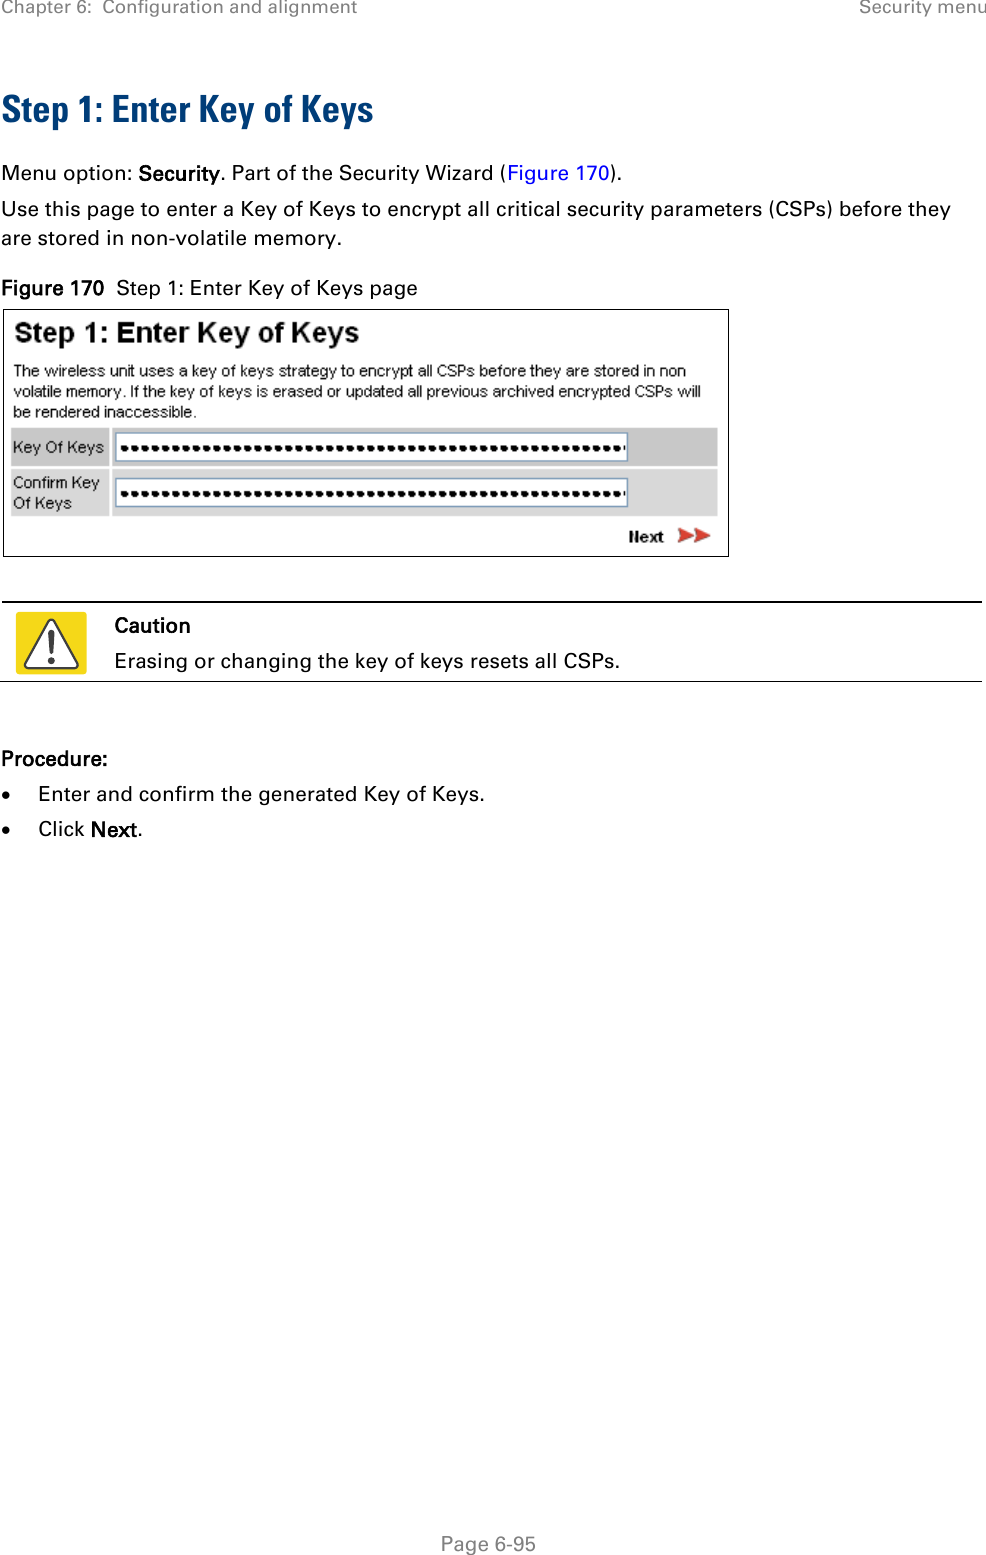 Chapter 6:  Configuration and alignment Security menu  Step 1: Enter Key of Keys Menu option: Security. Part of the Security Wizard (Figure 170). Use this page to enter a Key of Keys to encrypt all critical security parameters (CSPs) before they are stored in non-volatile memory. Figure 170  Step 1: Enter Key of Keys page    Caution Erasing or changing the key of keys resets all CSPs.  Procedure: • Enter and confirm the generated Key of Keys. • Click Next.  Page 6-95 